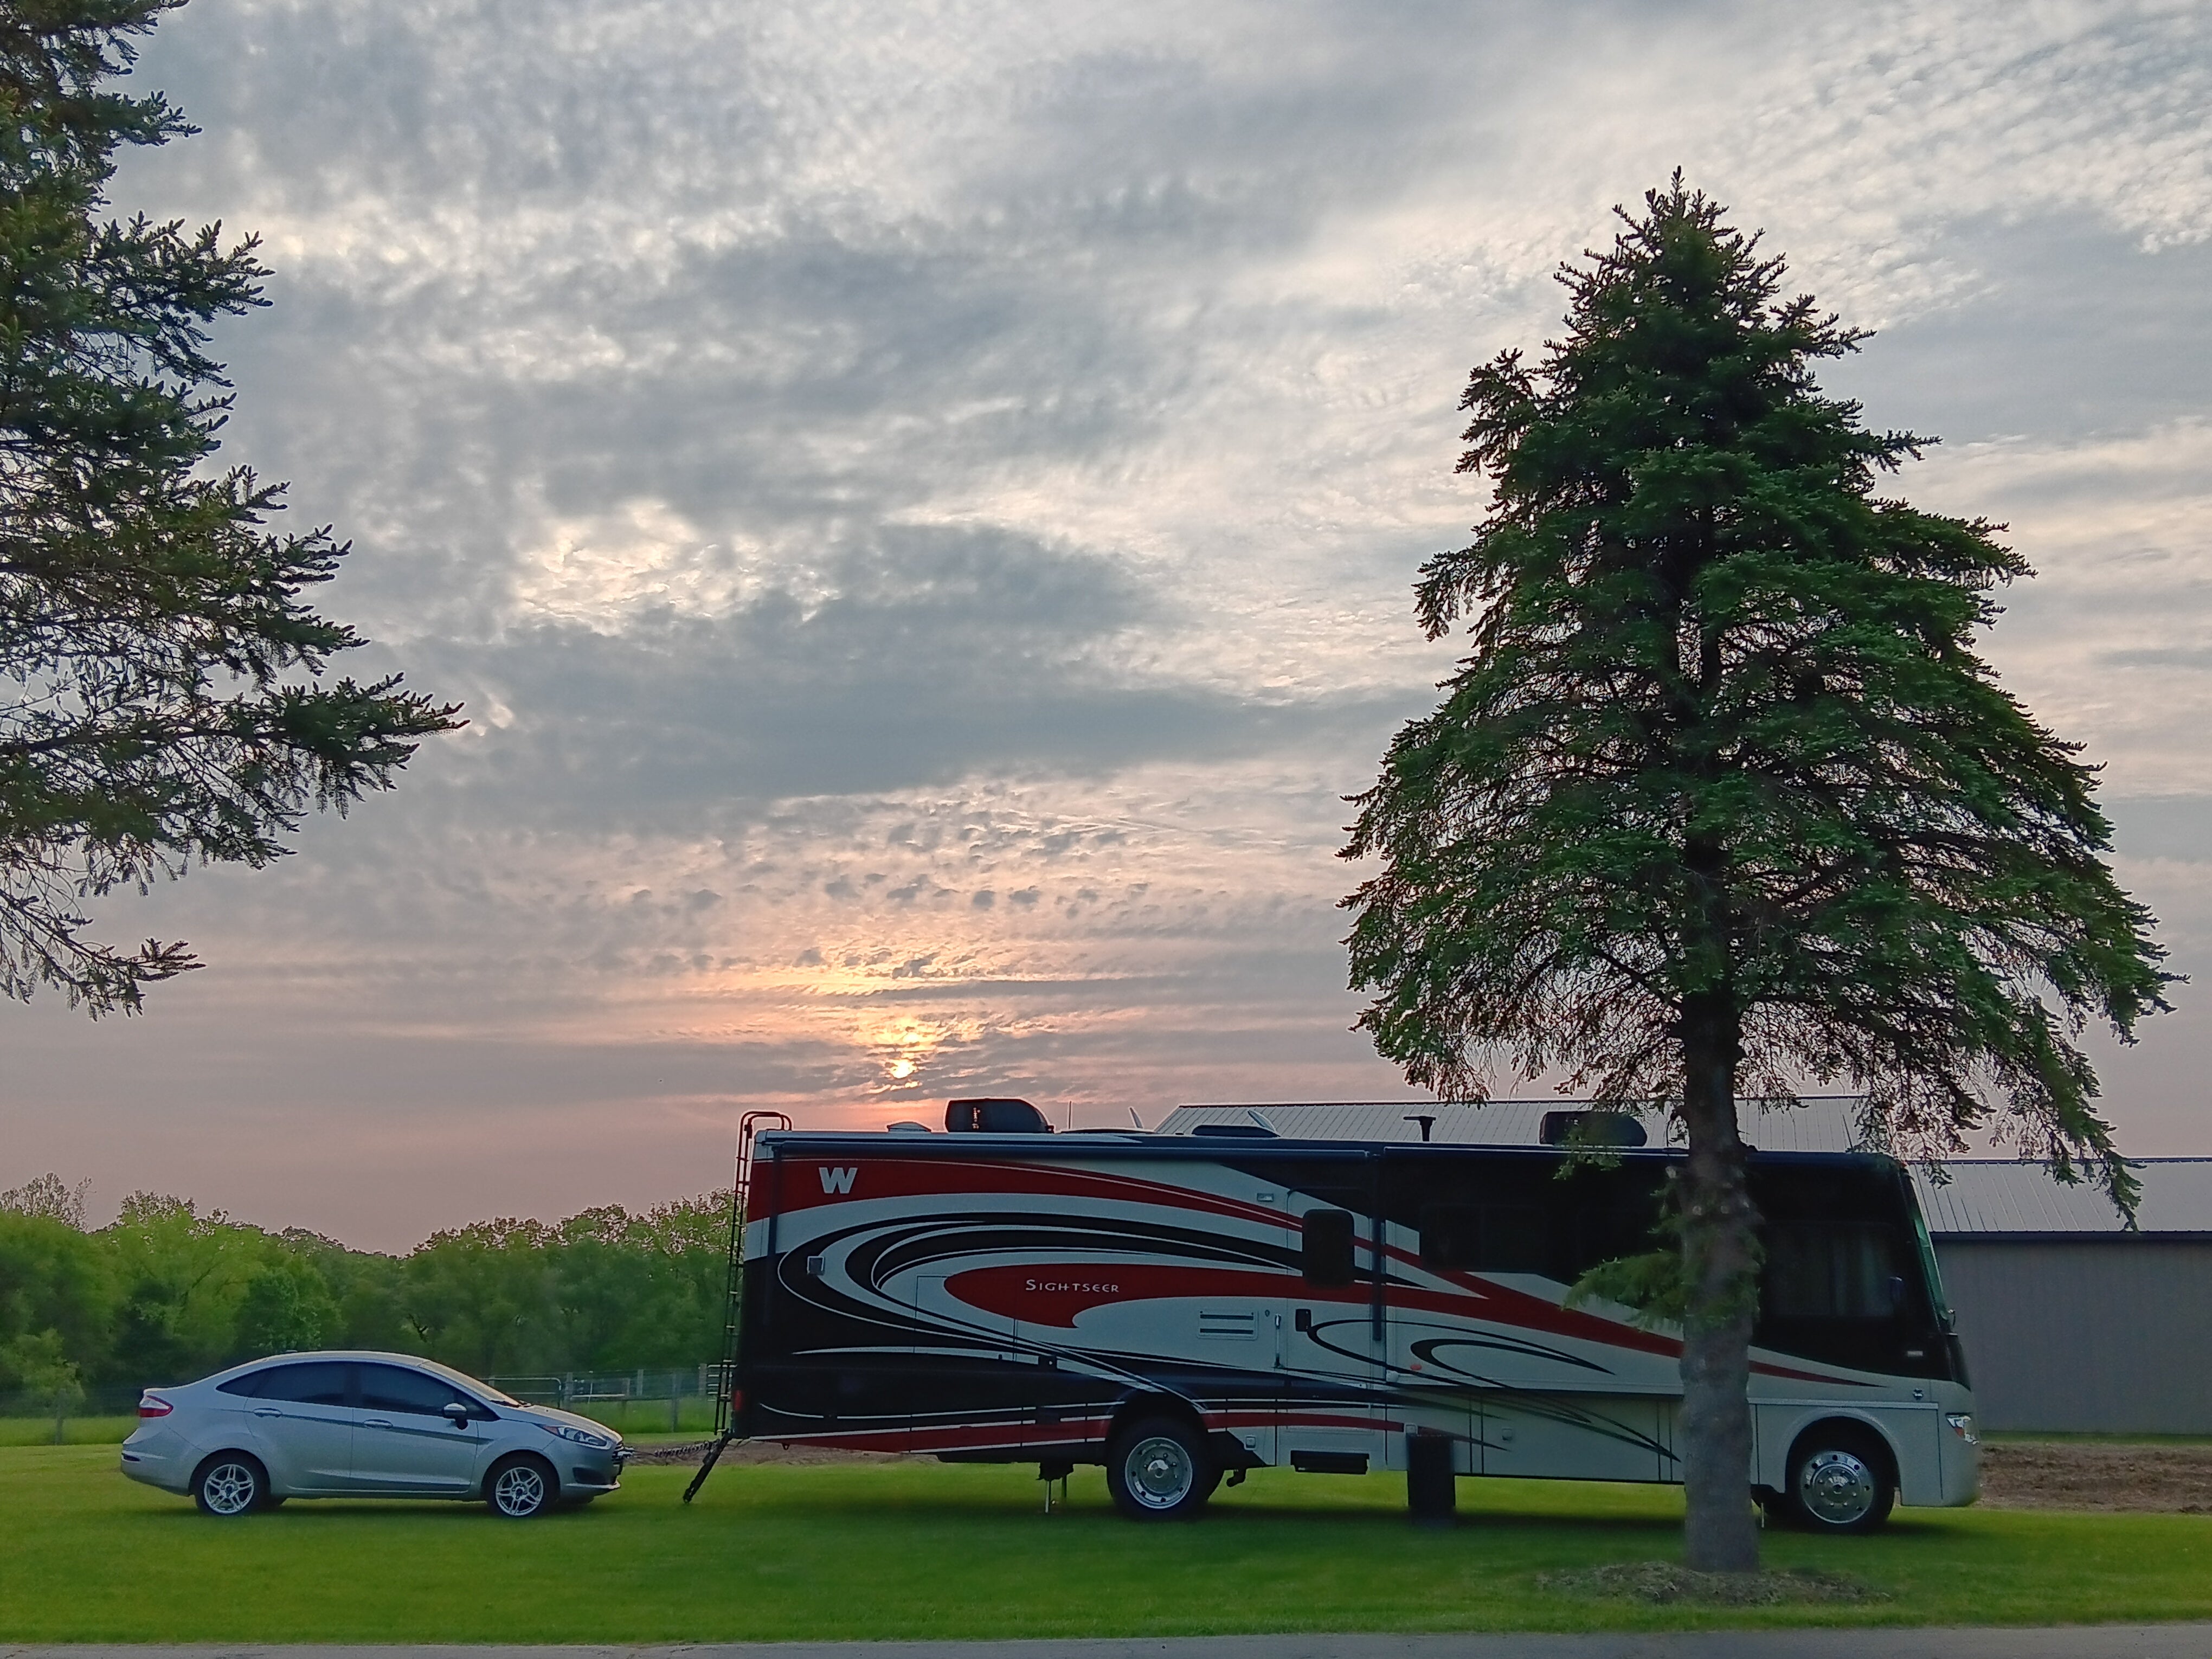 Sunrise over our RV at the Harvest Host H&P Family Farms in Angola, Indiana